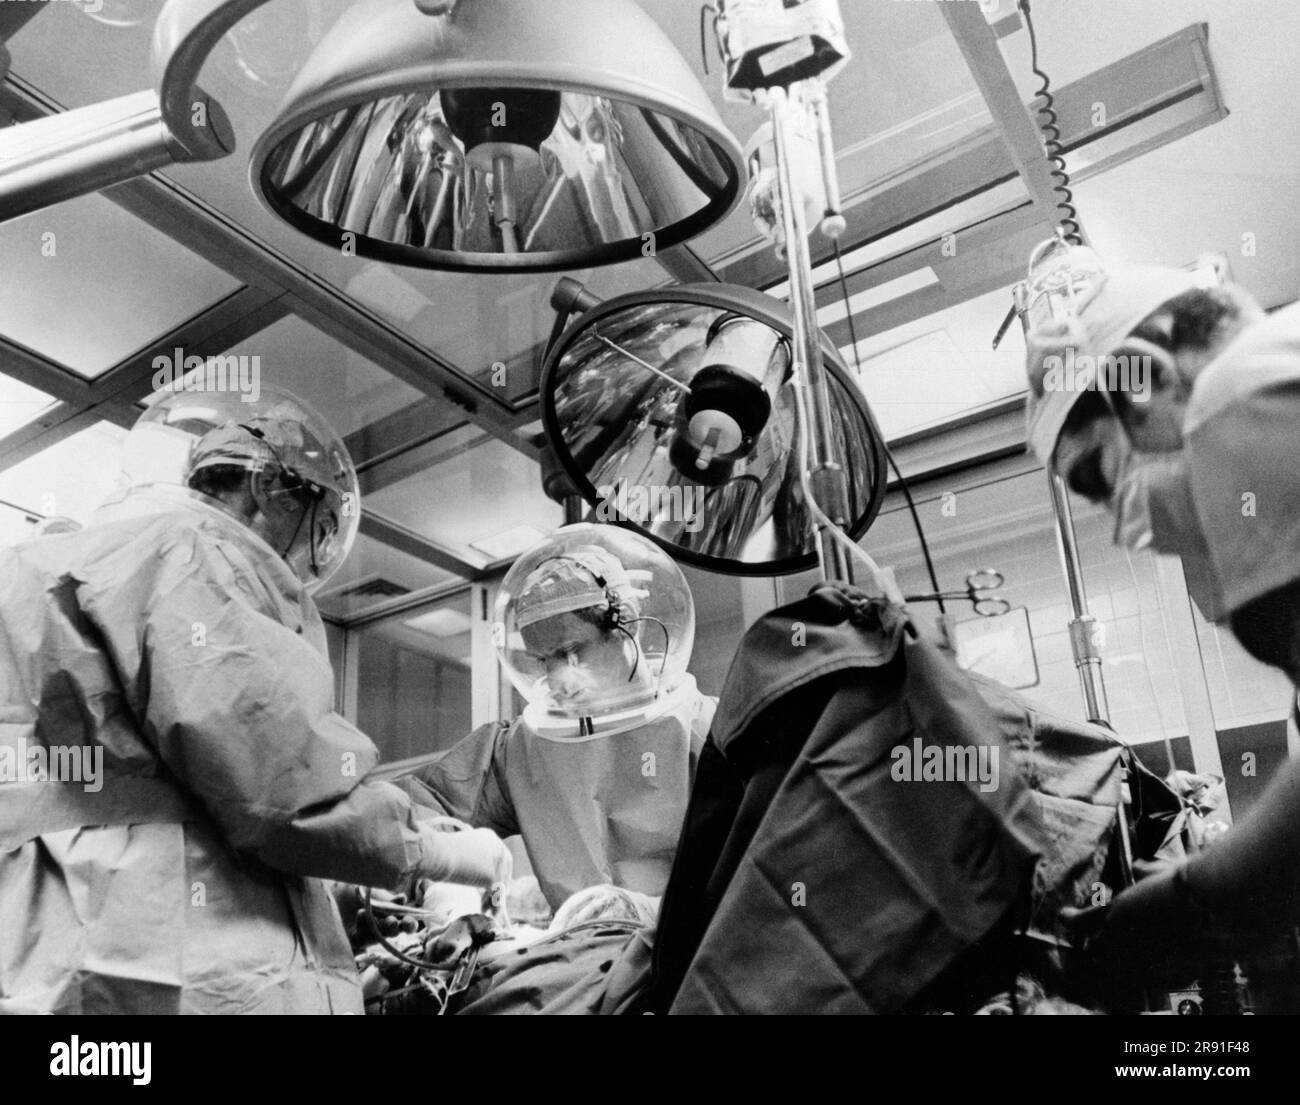 Denver, Colorado:  February 8, 1970 A surgery team at St. Luke's Hospital performing a hip joint replacement in a new clean room which helps lessen the danger of infection to the patient. It is being performed in a foldable clean roon which can be stored when not in use.  Air is forced in through the front and exits out the back and the operating team upwind of the patient wears astronaut type helmets and garments which are impermeable to bacteria. The clean room technique for surgery was developed by the Martin Marietta Corporation for NASA and is being tested at St. Luke's. Stock Photo